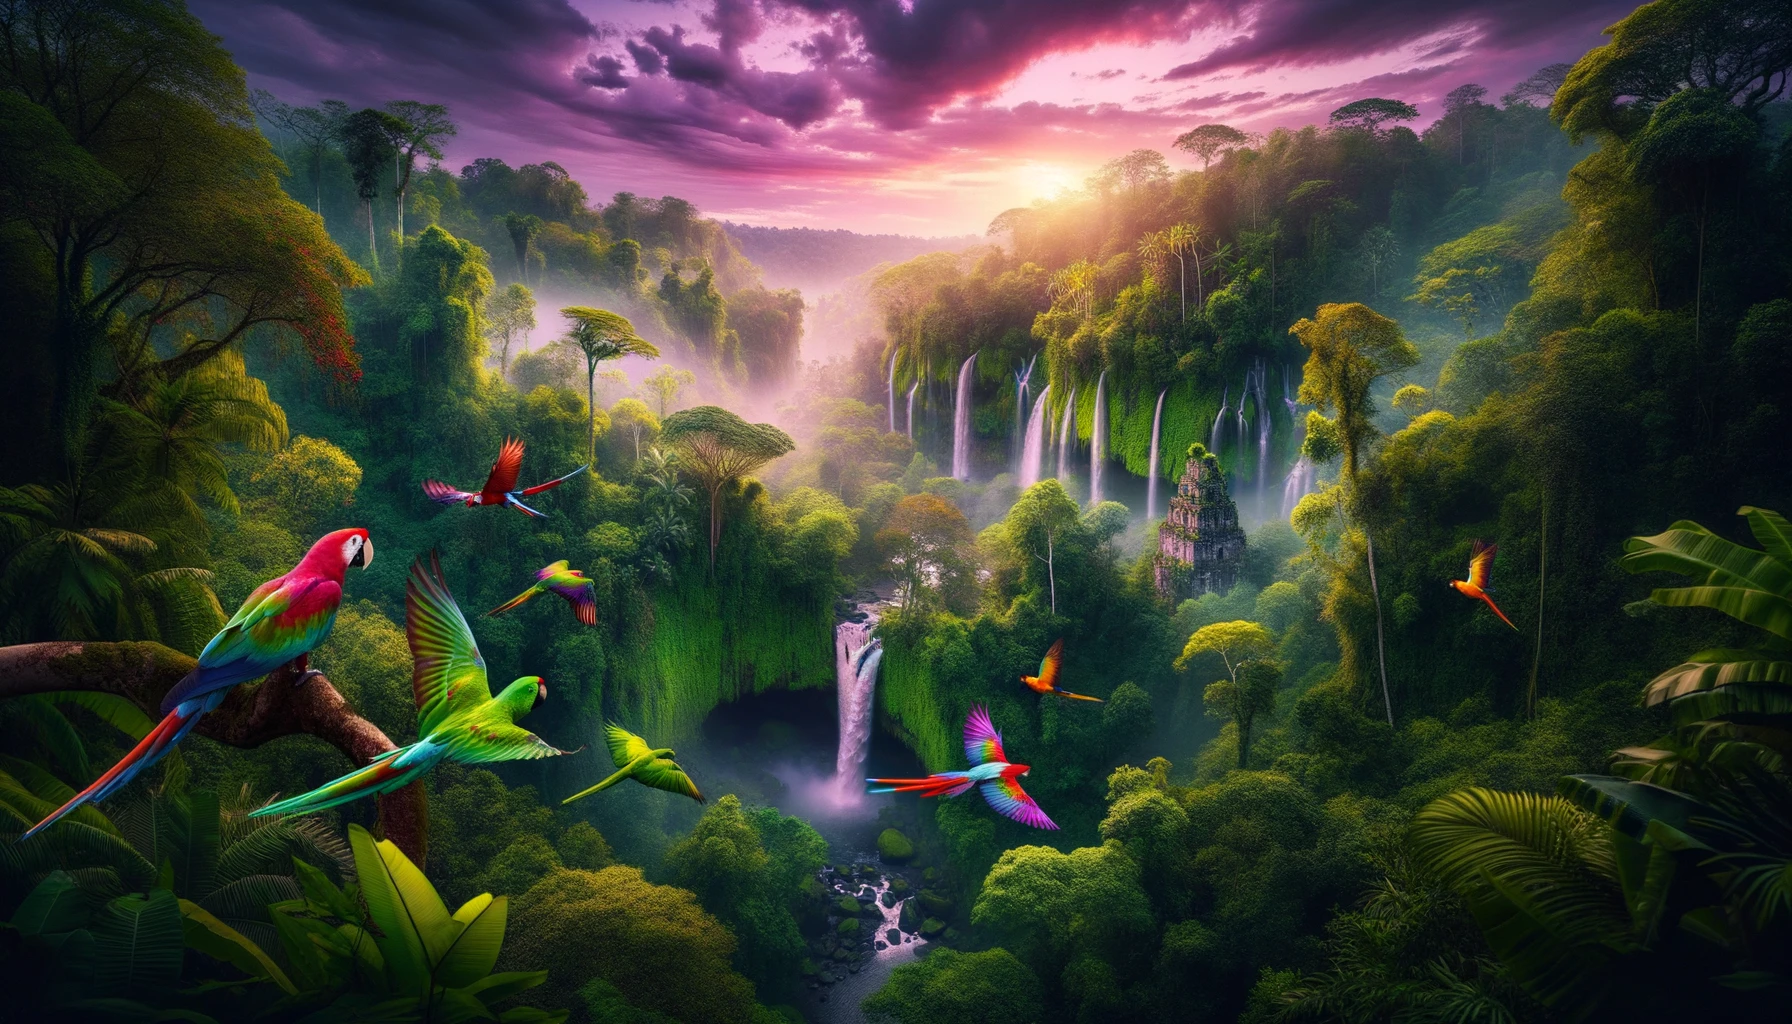 Photo of a lush rainforest at dawn. The sky is painted with hues of purple and pink. Vibrant parrots, with red, green, and yellow feathers, fly across the scene. Multiple cascading waterfalls can be seen, their waters shimmering in the morning light. Amidst the thick green foliage, an ancient stone temple is partially visible, hinting at mysteries untold.